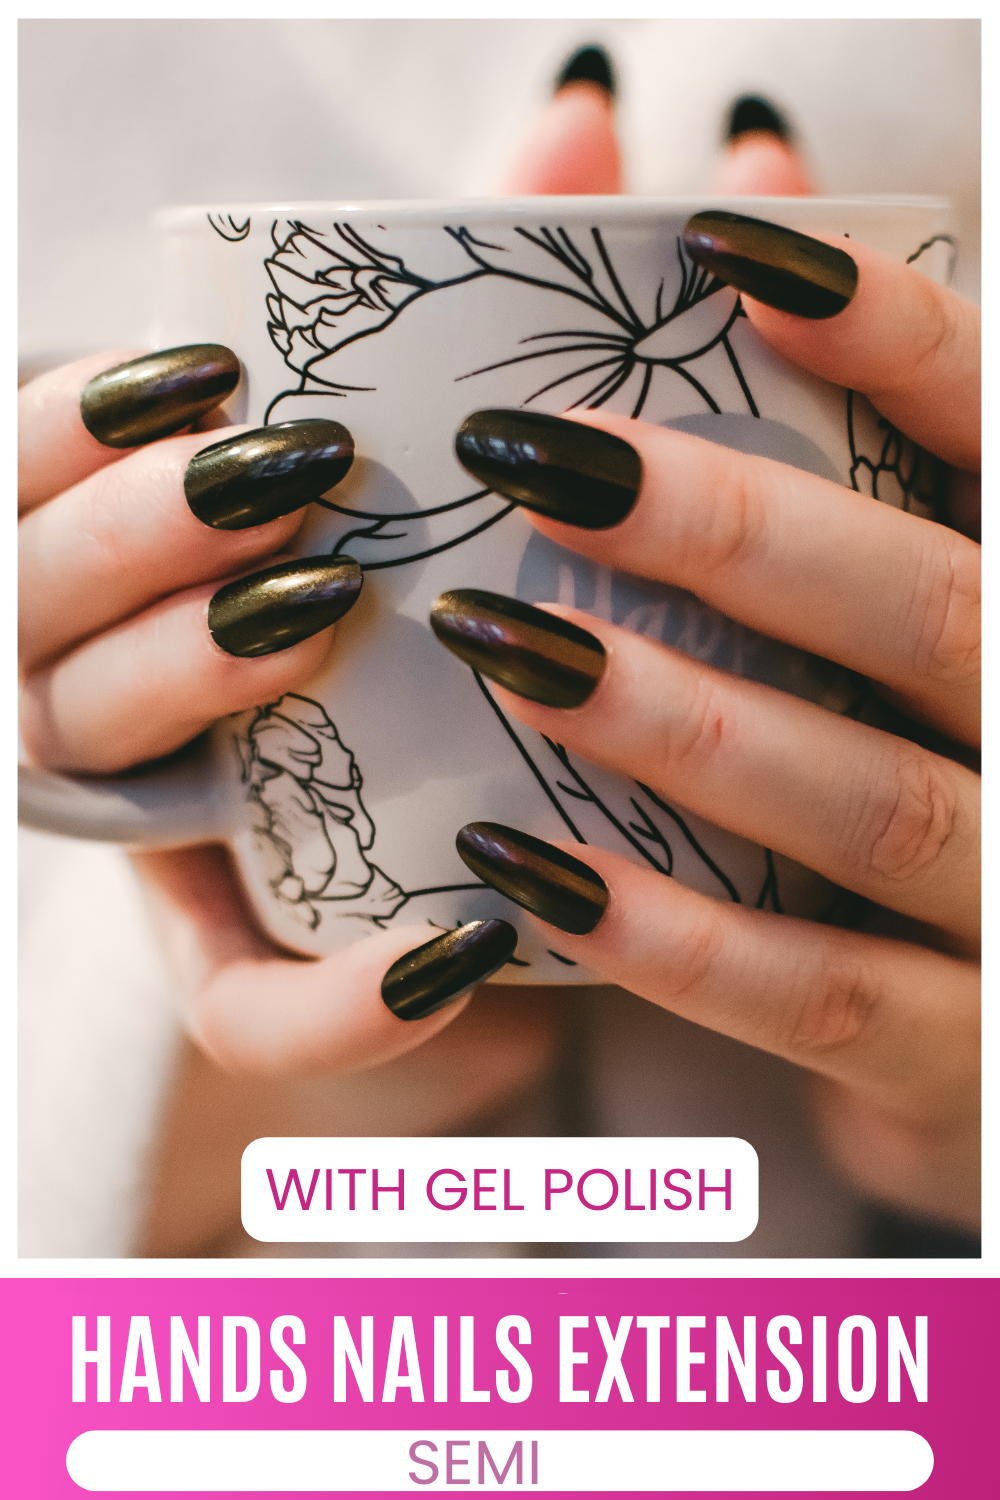 Nails Extension in Gel | Pics Nails